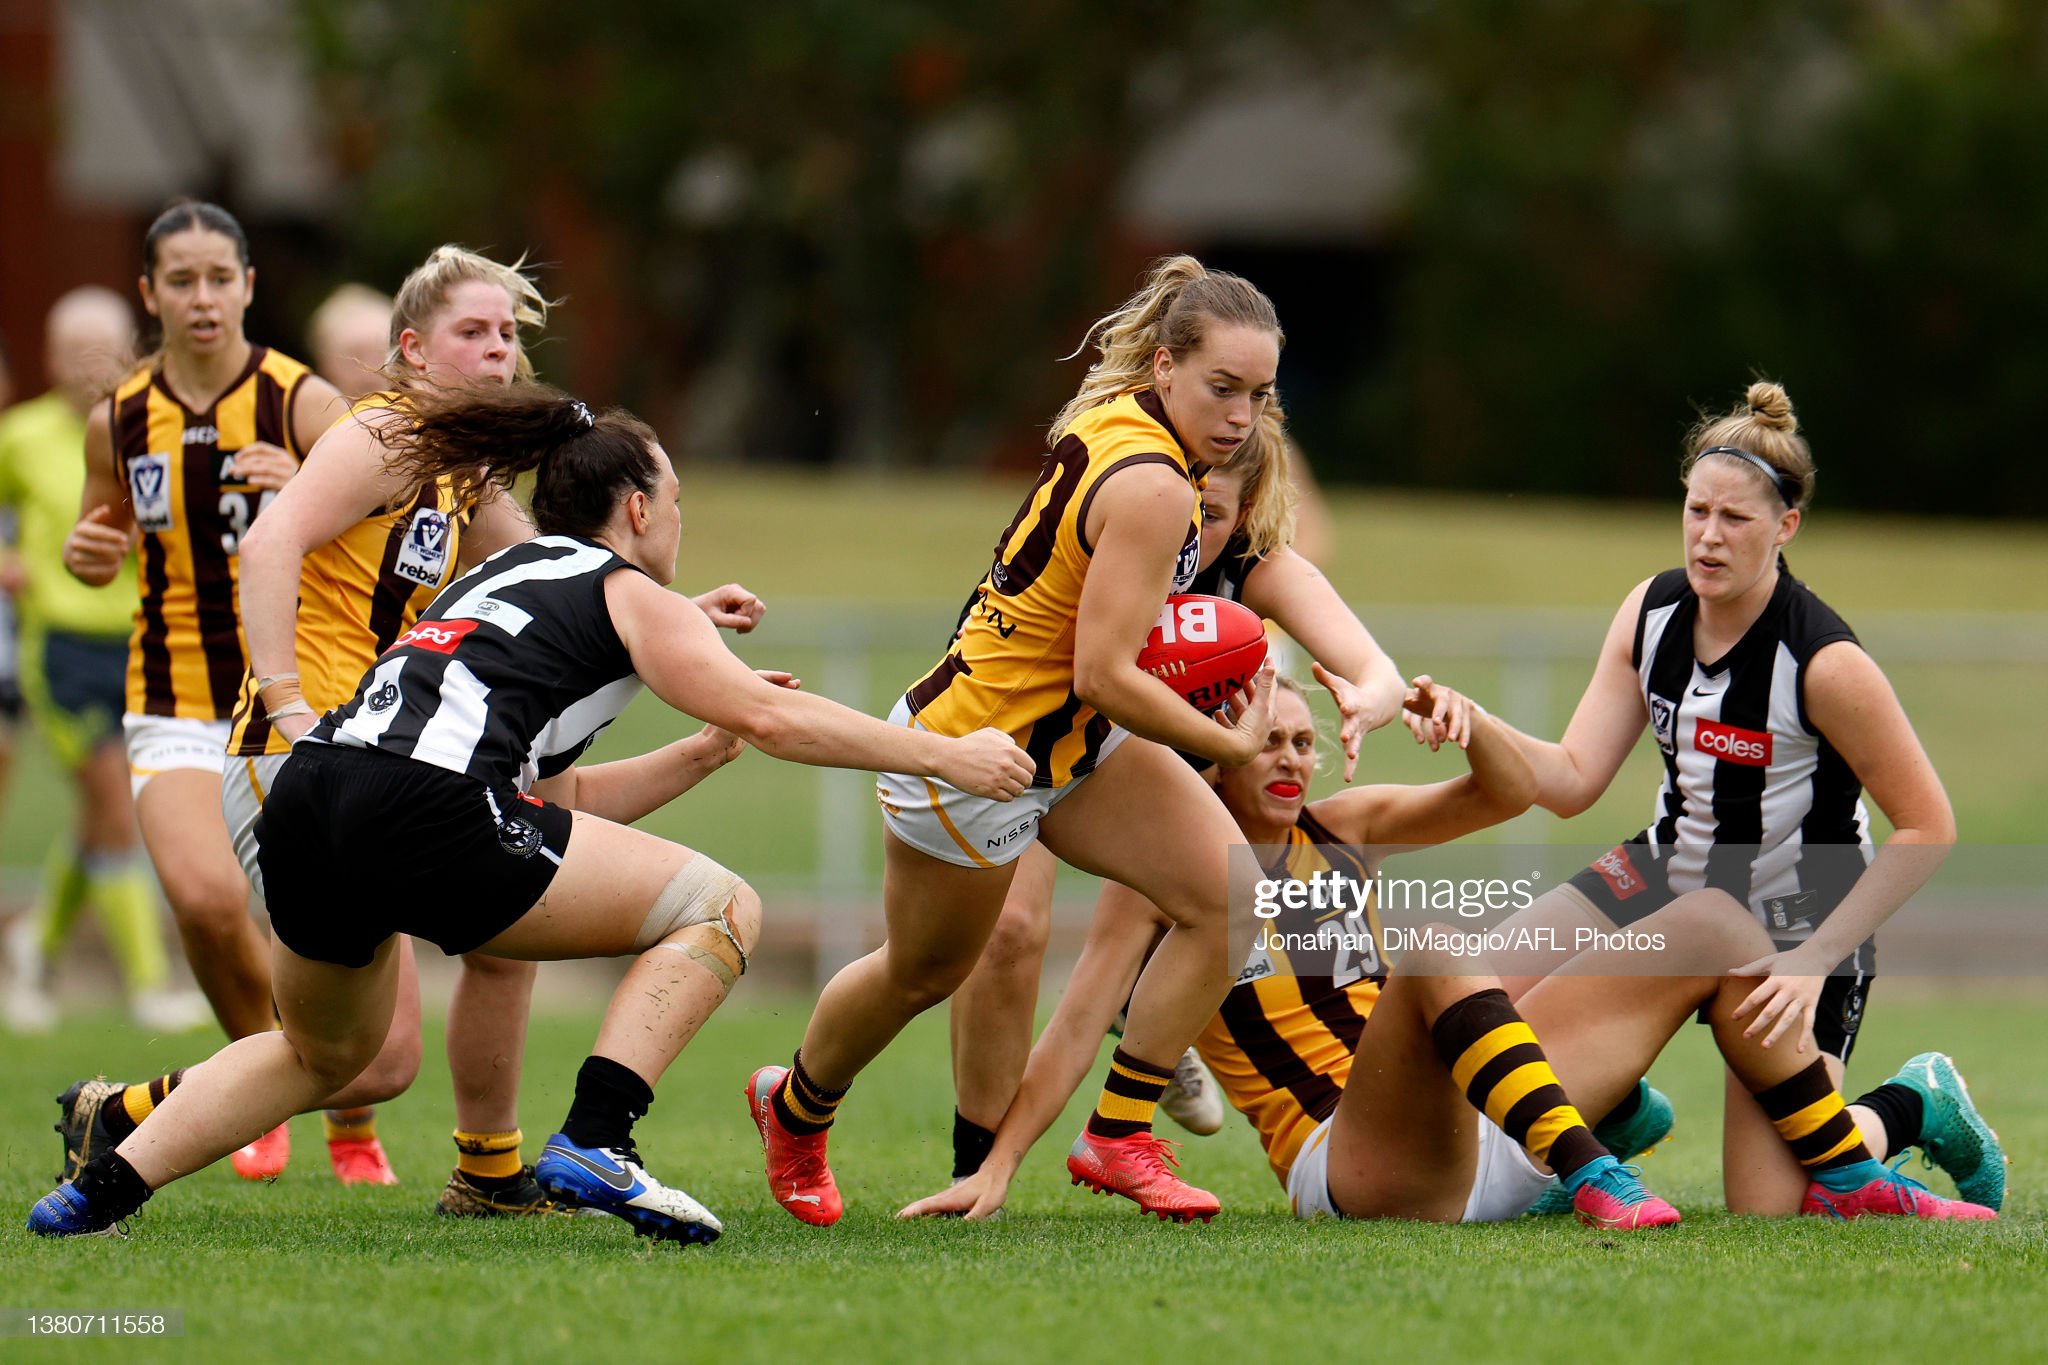 montana-beruldsen-of-the-hawks-in-action-during-the-round-four-vflw-picture-id1380711558